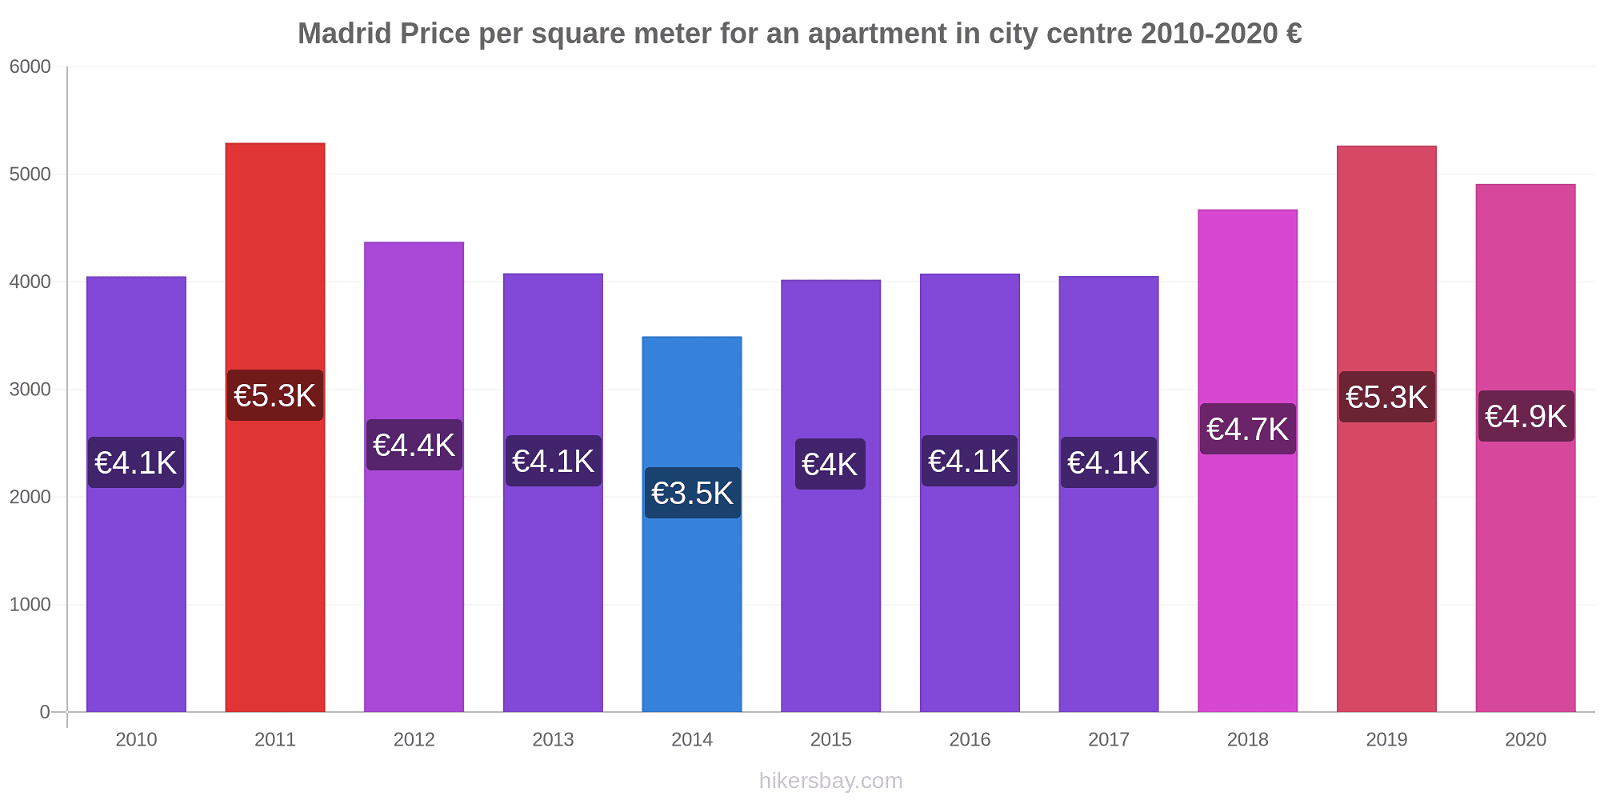 Madrid price changes Price per square meter for an apartment in city centre hikersbay.com